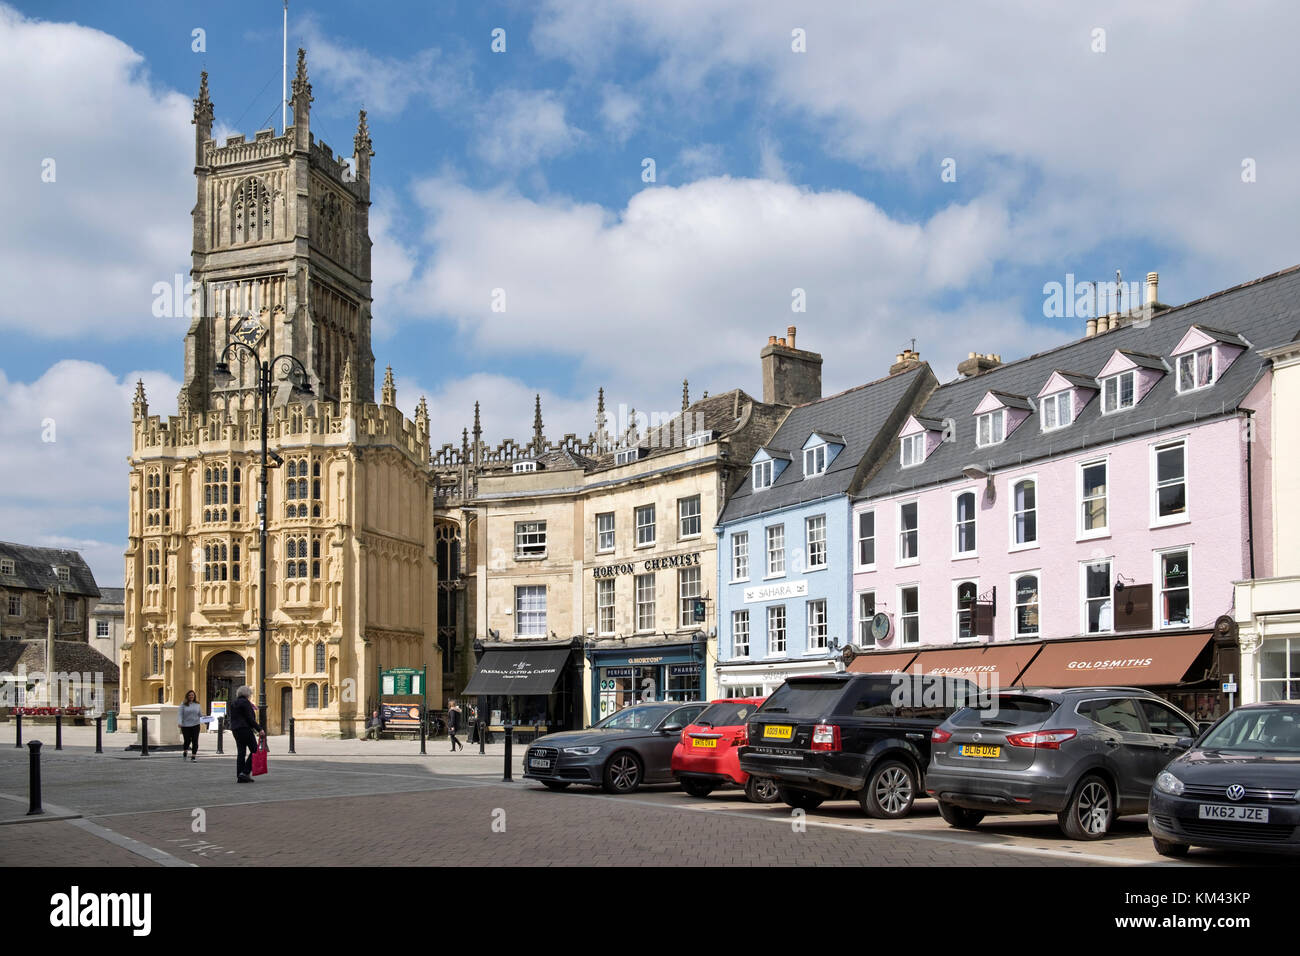 The market place in the town center of Cirencester, Gloucestershire, UK. On a sunny day, Showing the church of St John the Baptist. & cars parked. Stock Photo